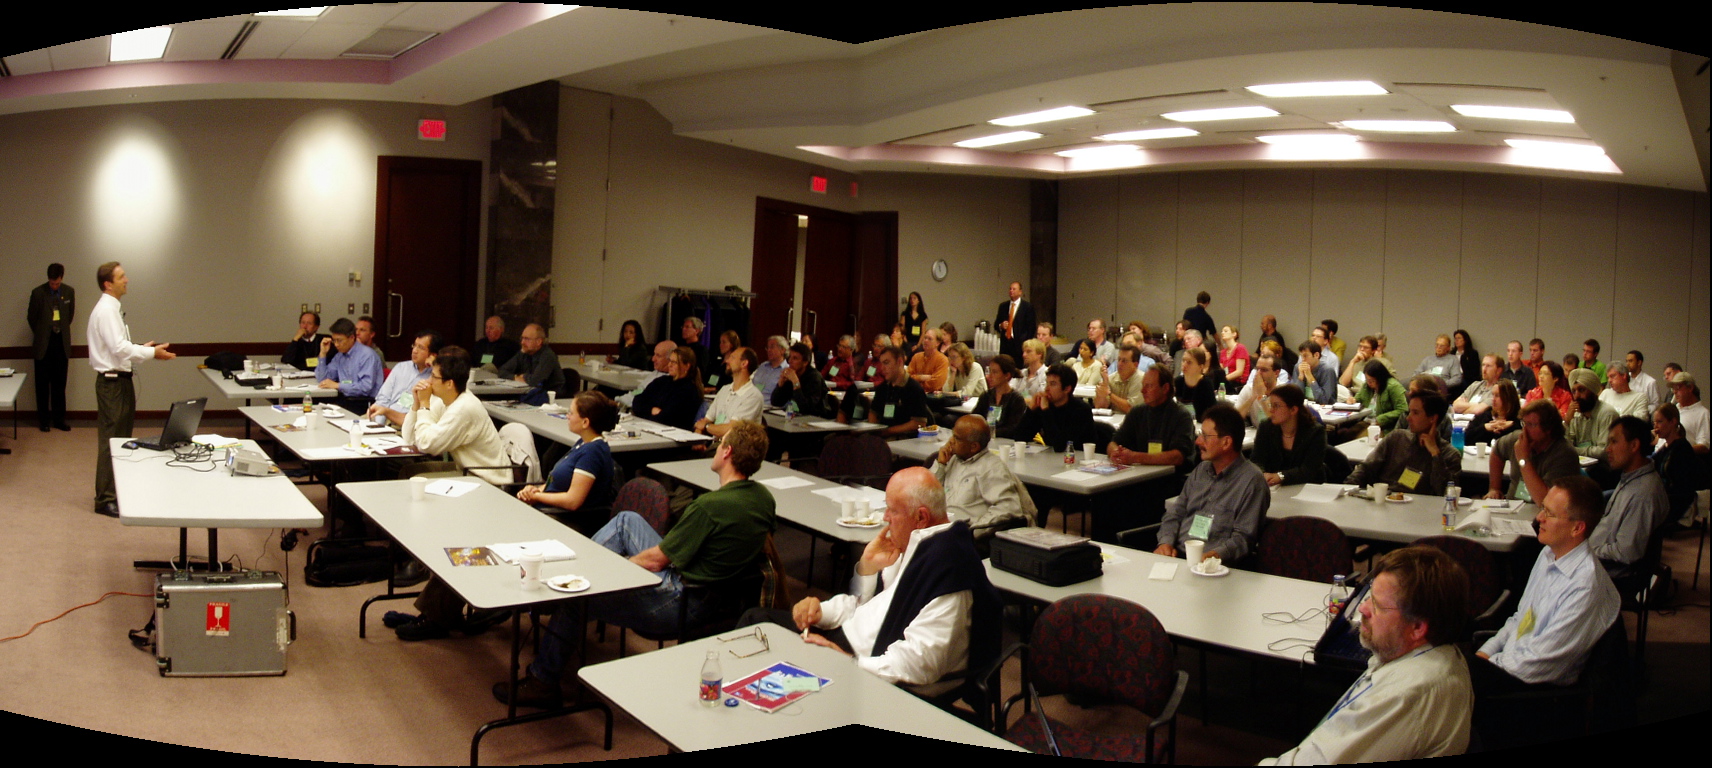 Peter Coombes attracted a large audience to the 2005 Rainwater Harvesting Workshop in Vancouver